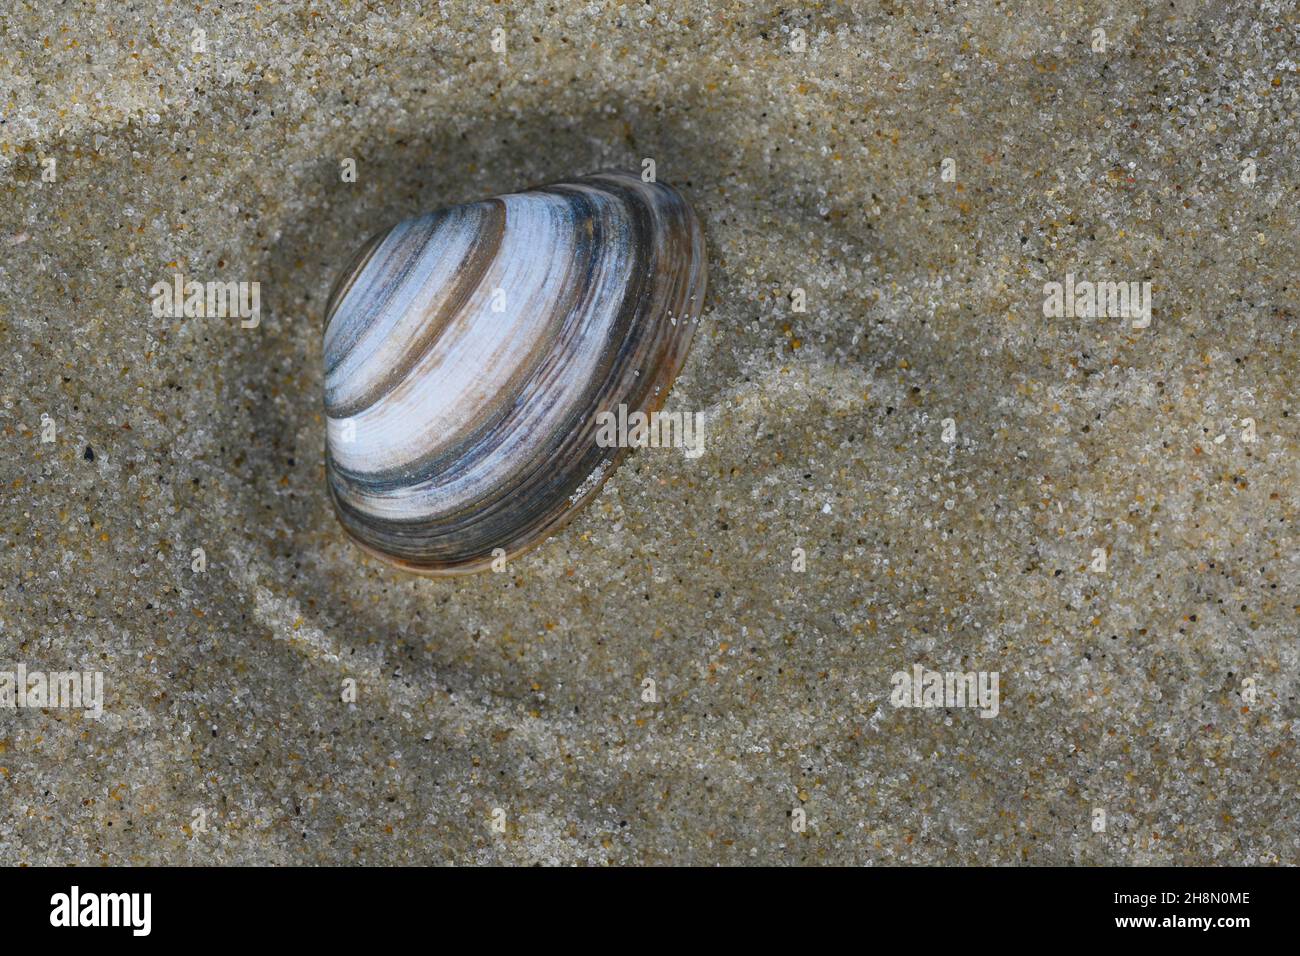 Baltic macoma (Limecola balthica) on the beach of the North Sea, island, Spiekeroog, Lower Saxony, Germany Stock Photo